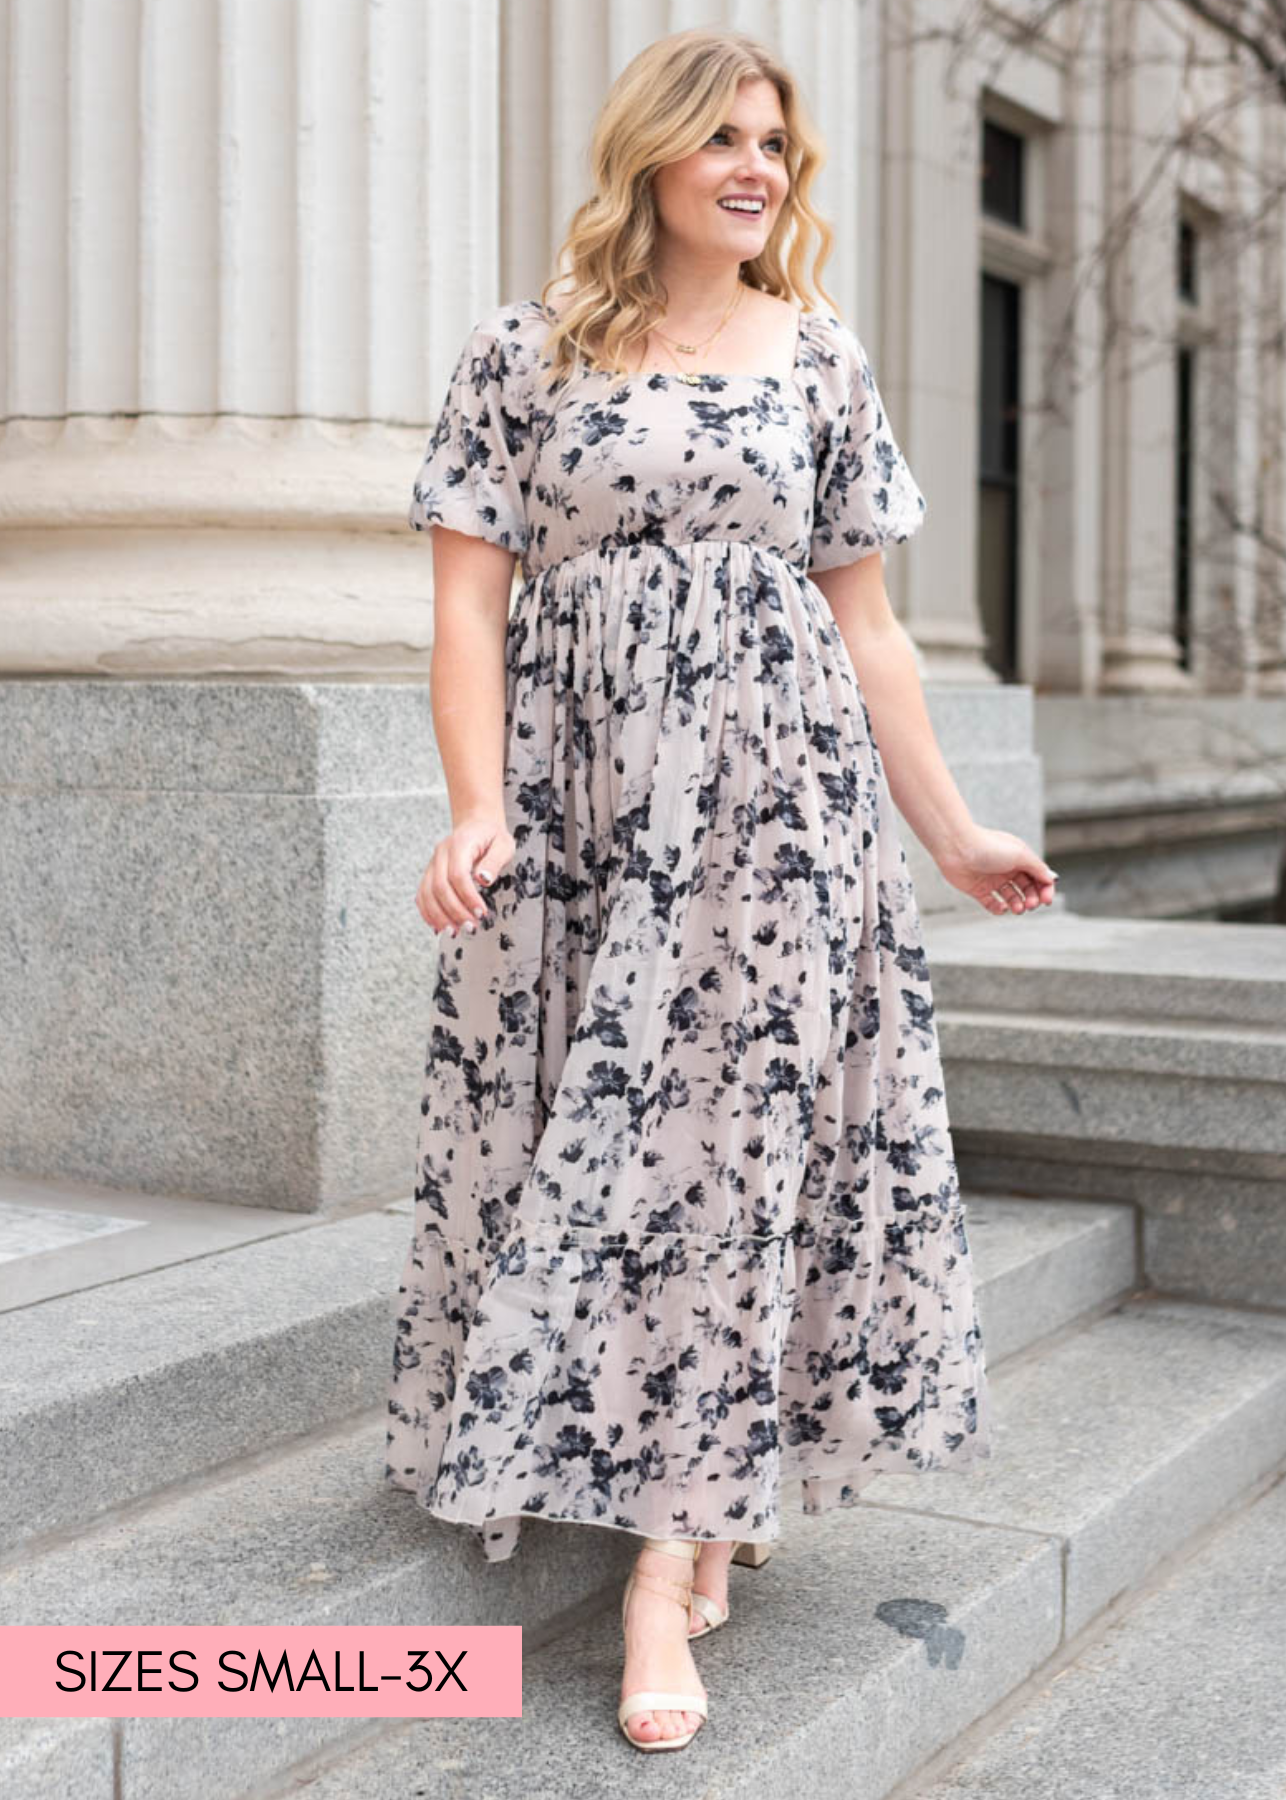 Floral dress with short sleeves